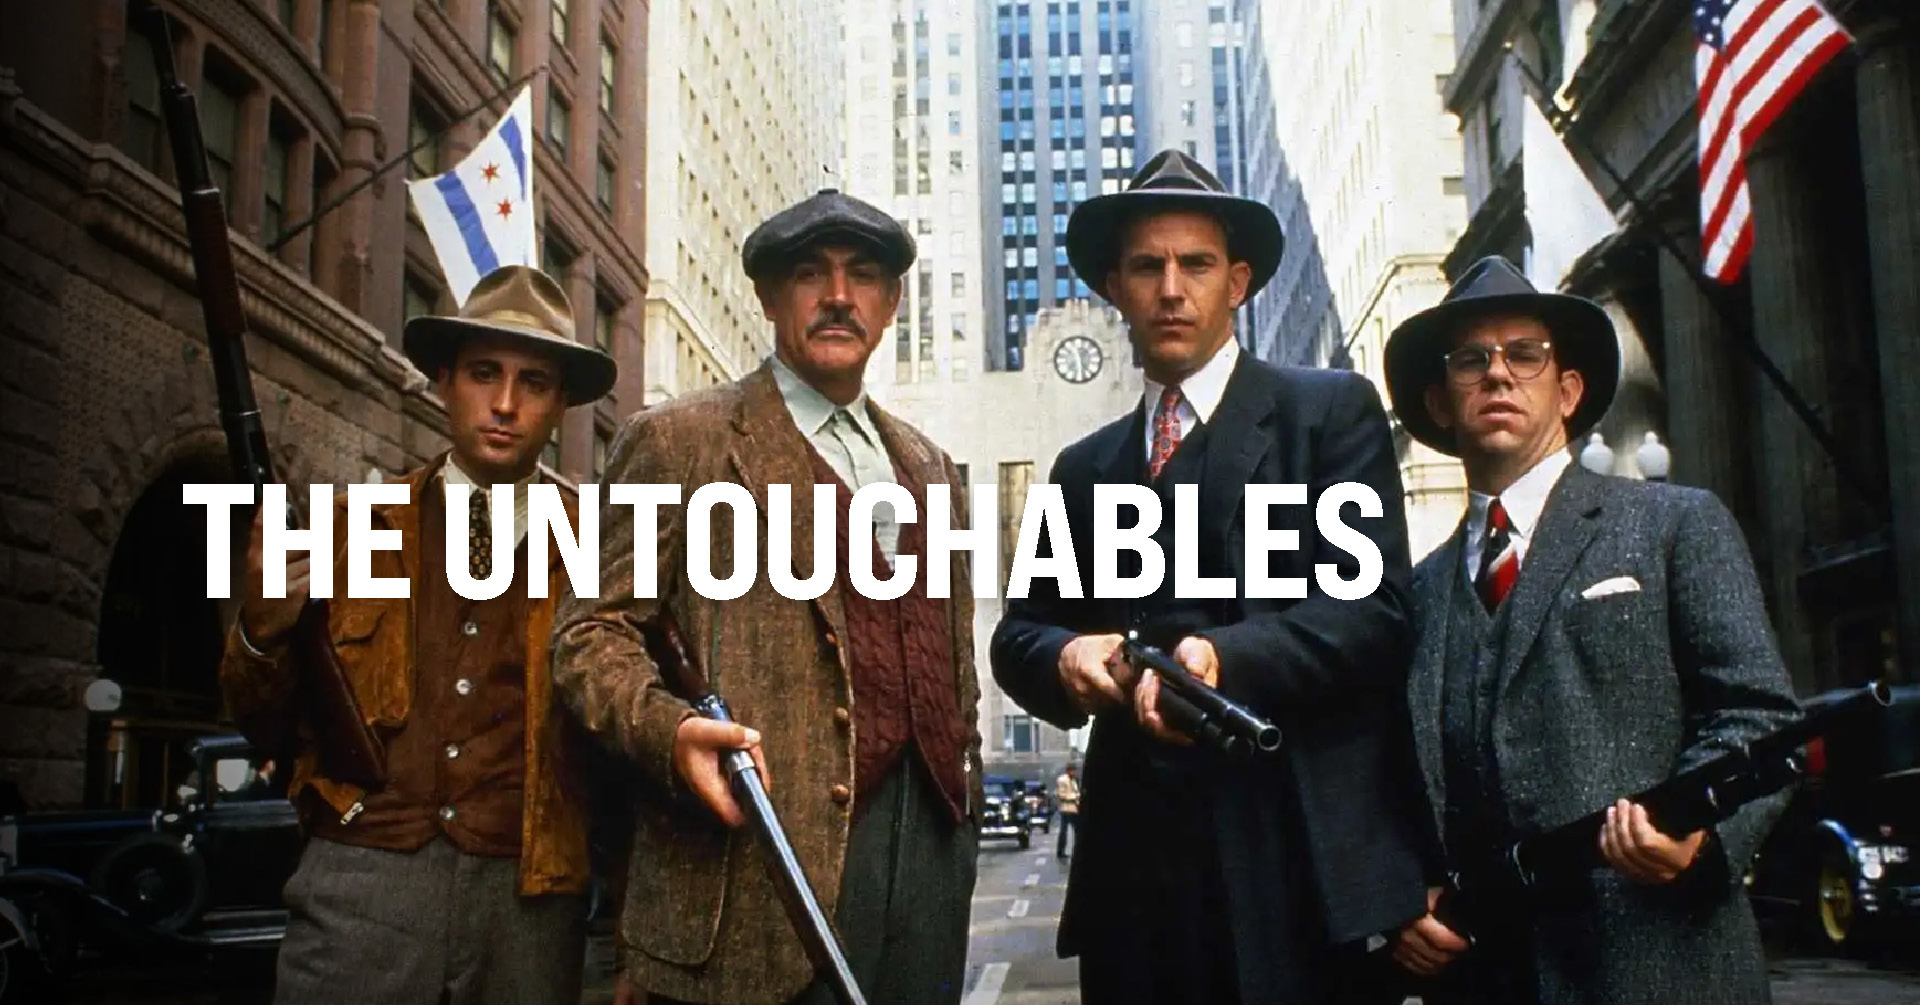 33-facts-about-the-movie-the-untouchables